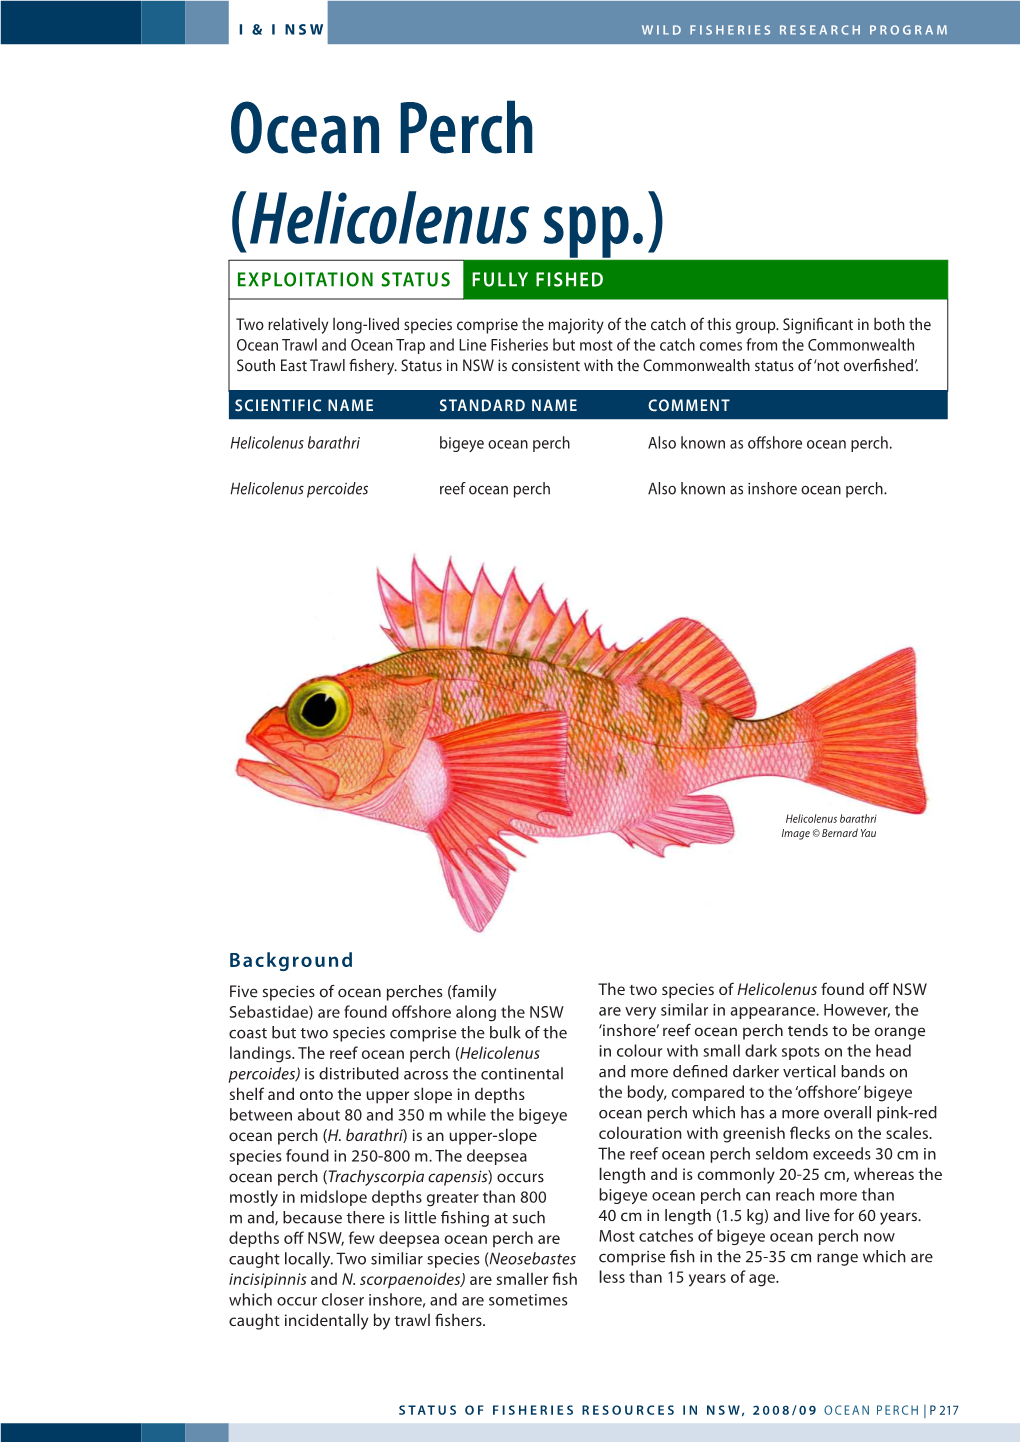 Ocean Perch (Helicolenus Spp.) Exploitation Status Fully Fished